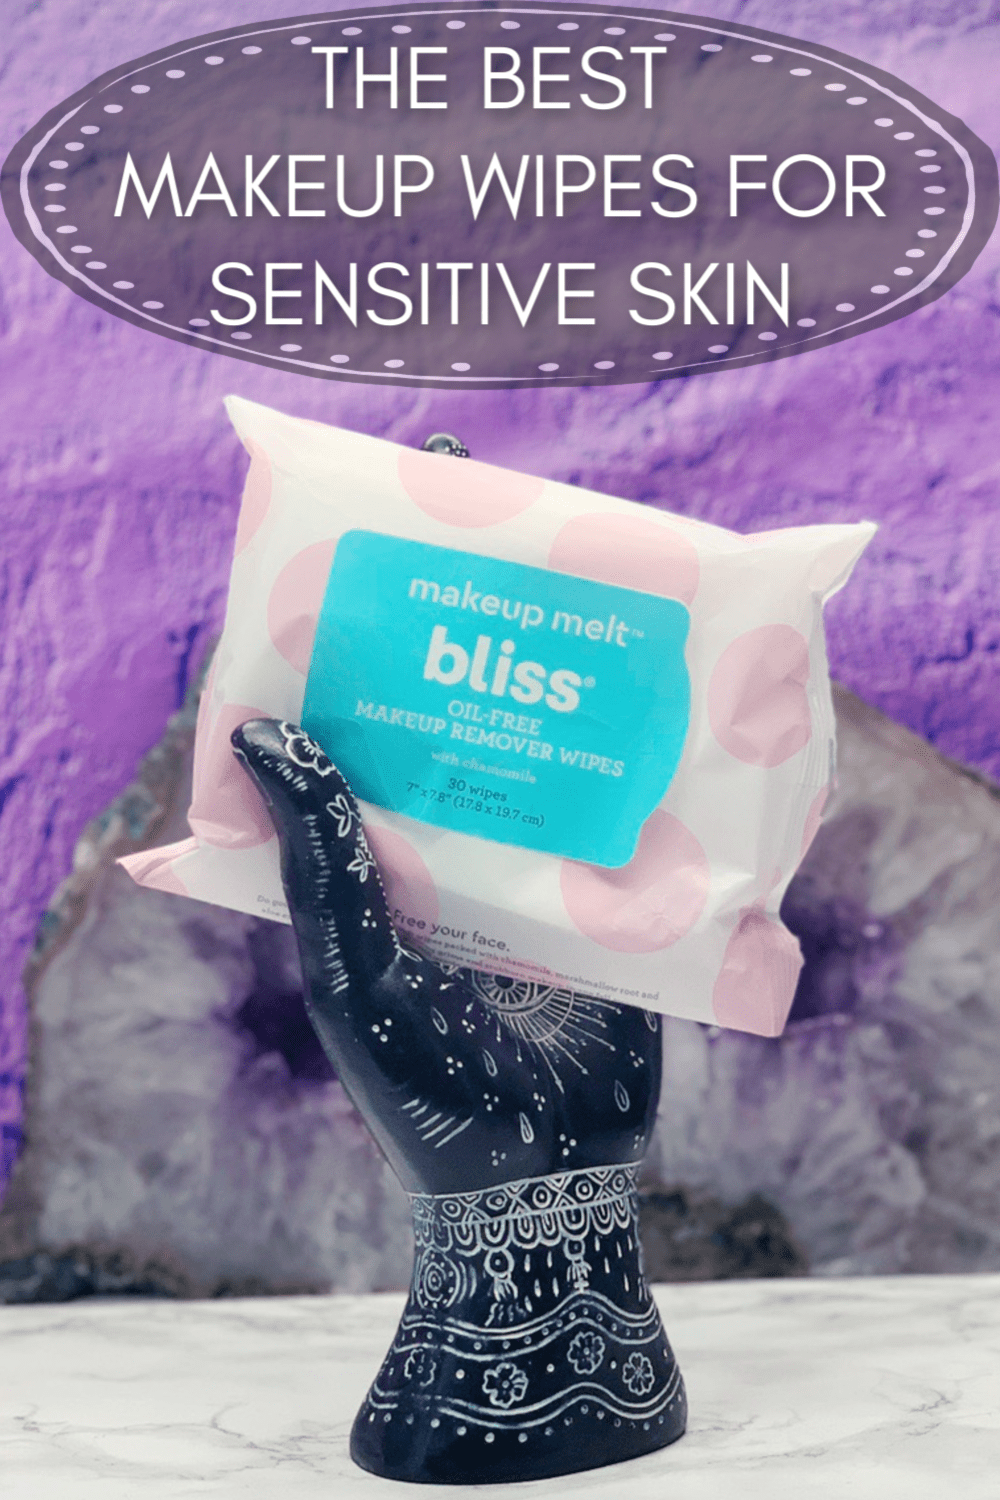 What’s the Best Makeup Wipes for Sensitive Skin?